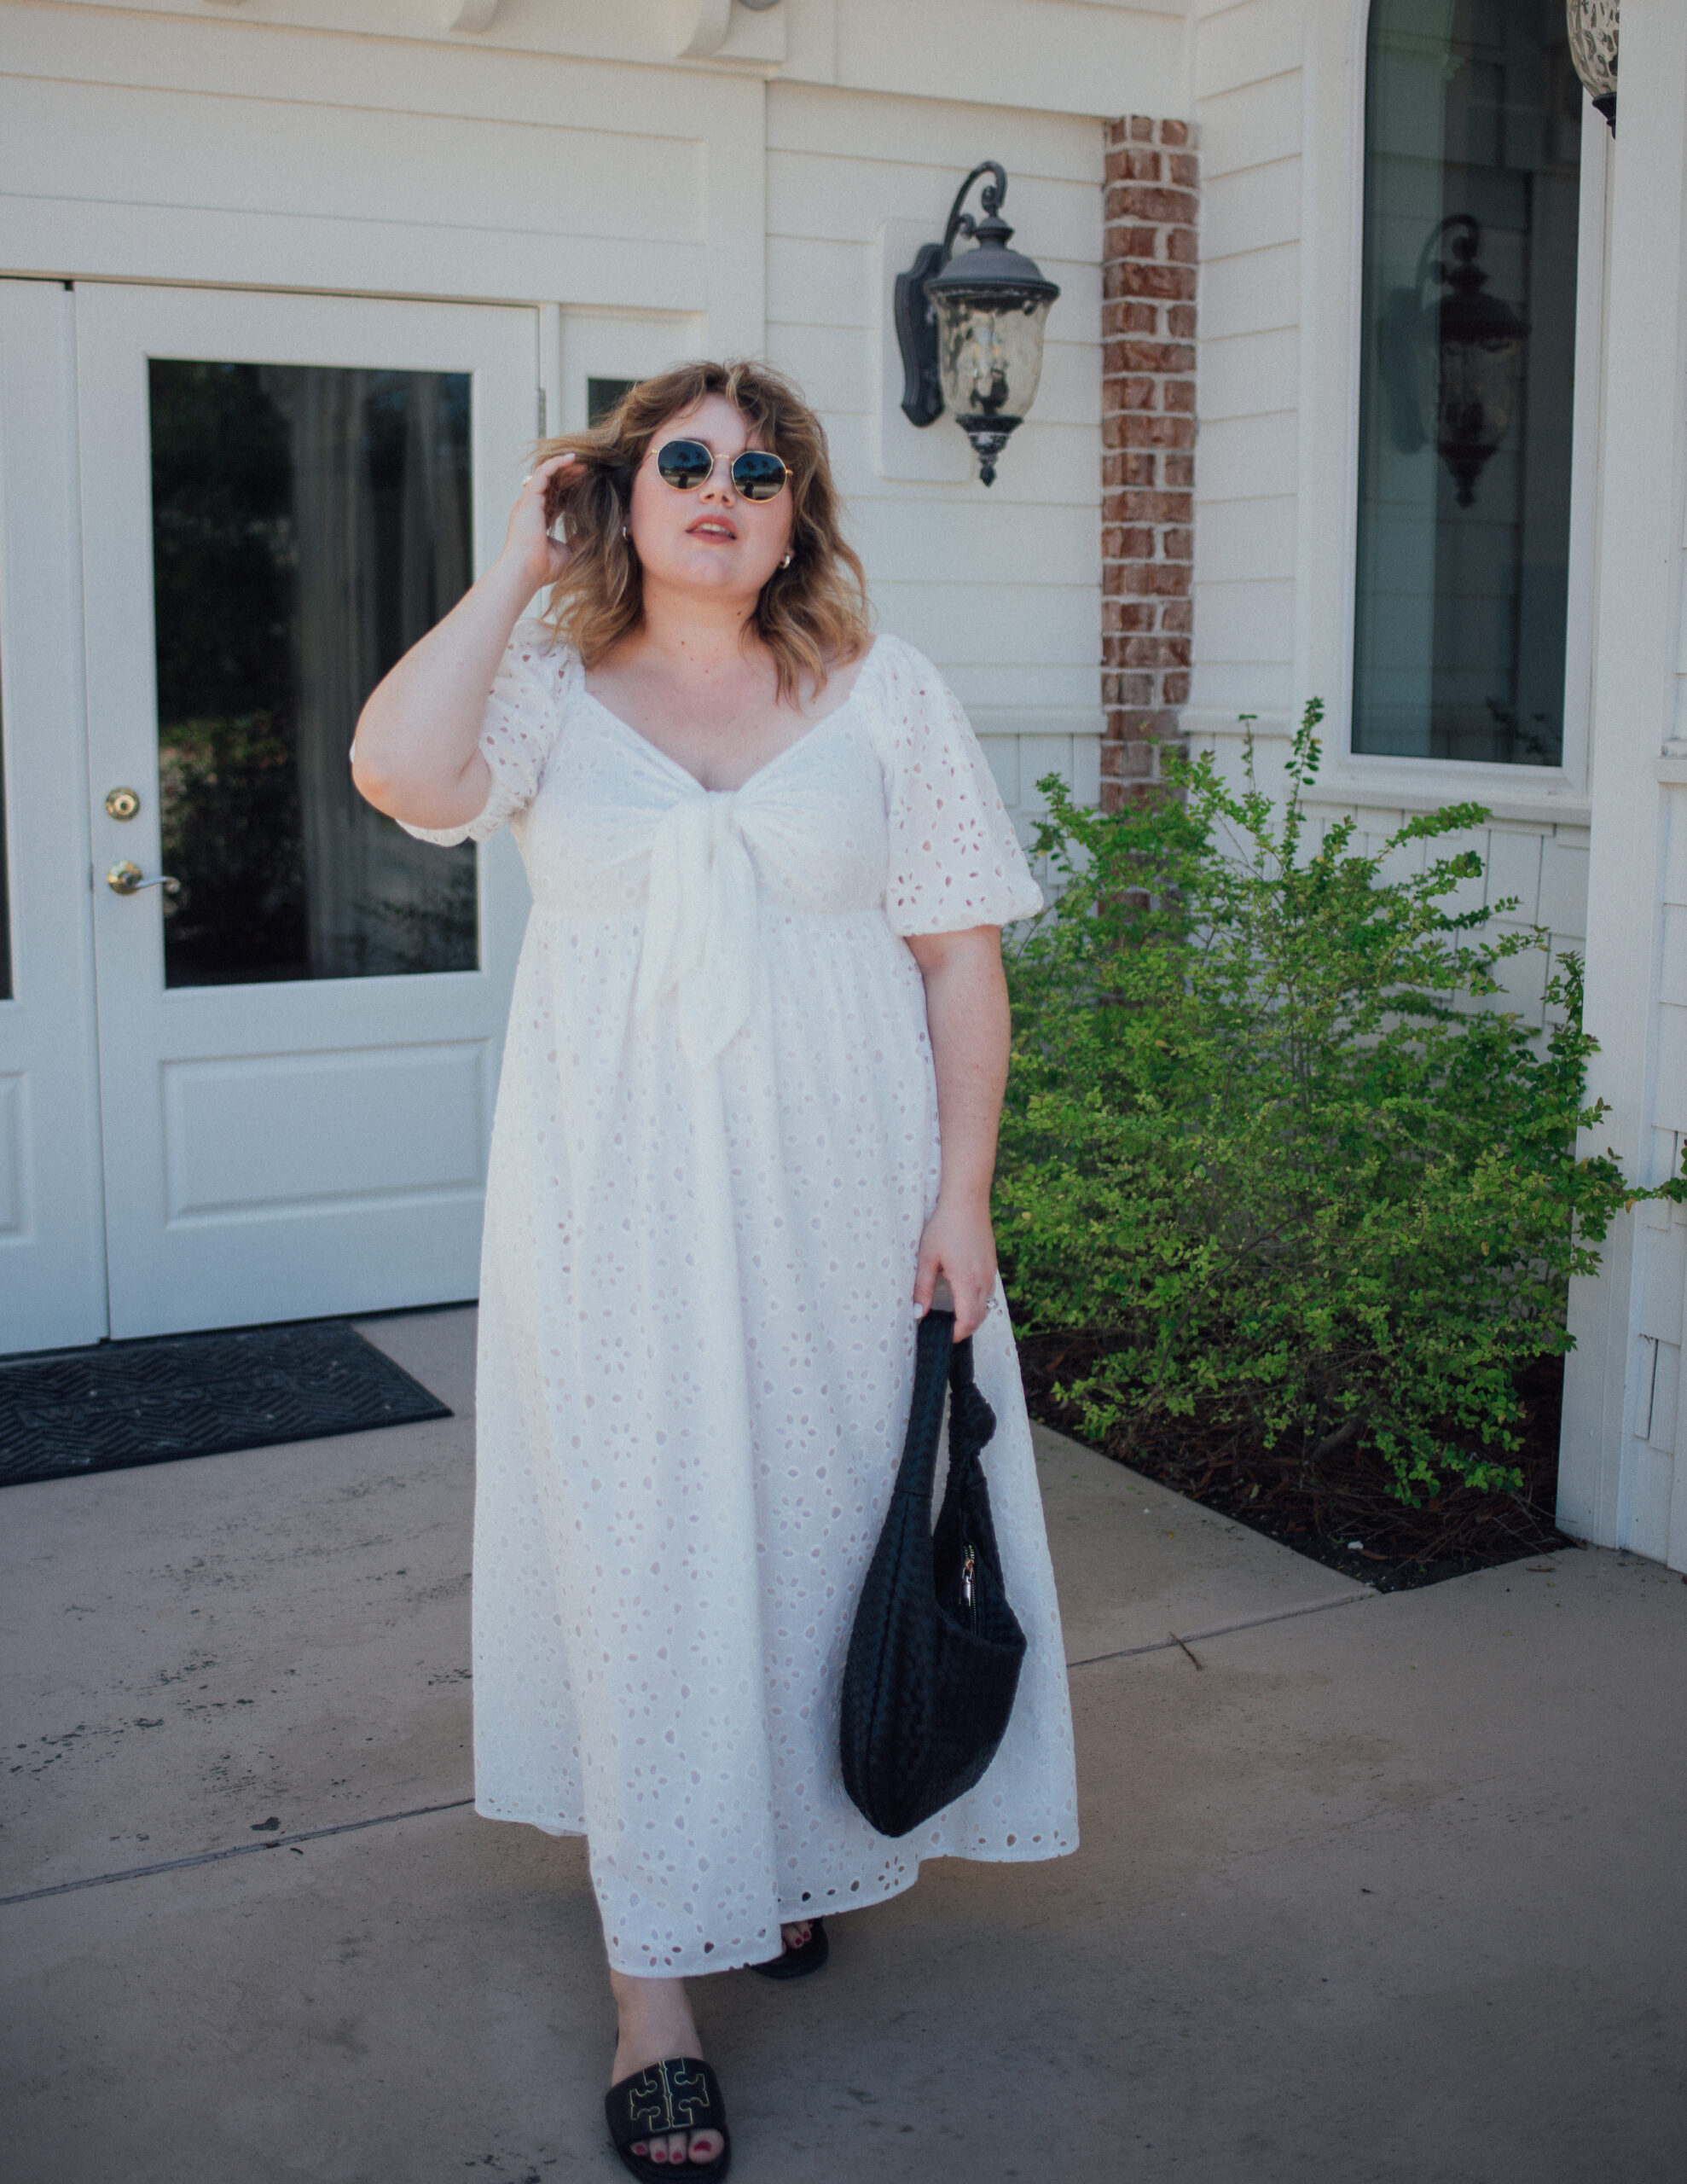 Sharing some plus size eyelet pieces for spring and summer! The eyelet is a classic style of fabric that is light and breezy!  